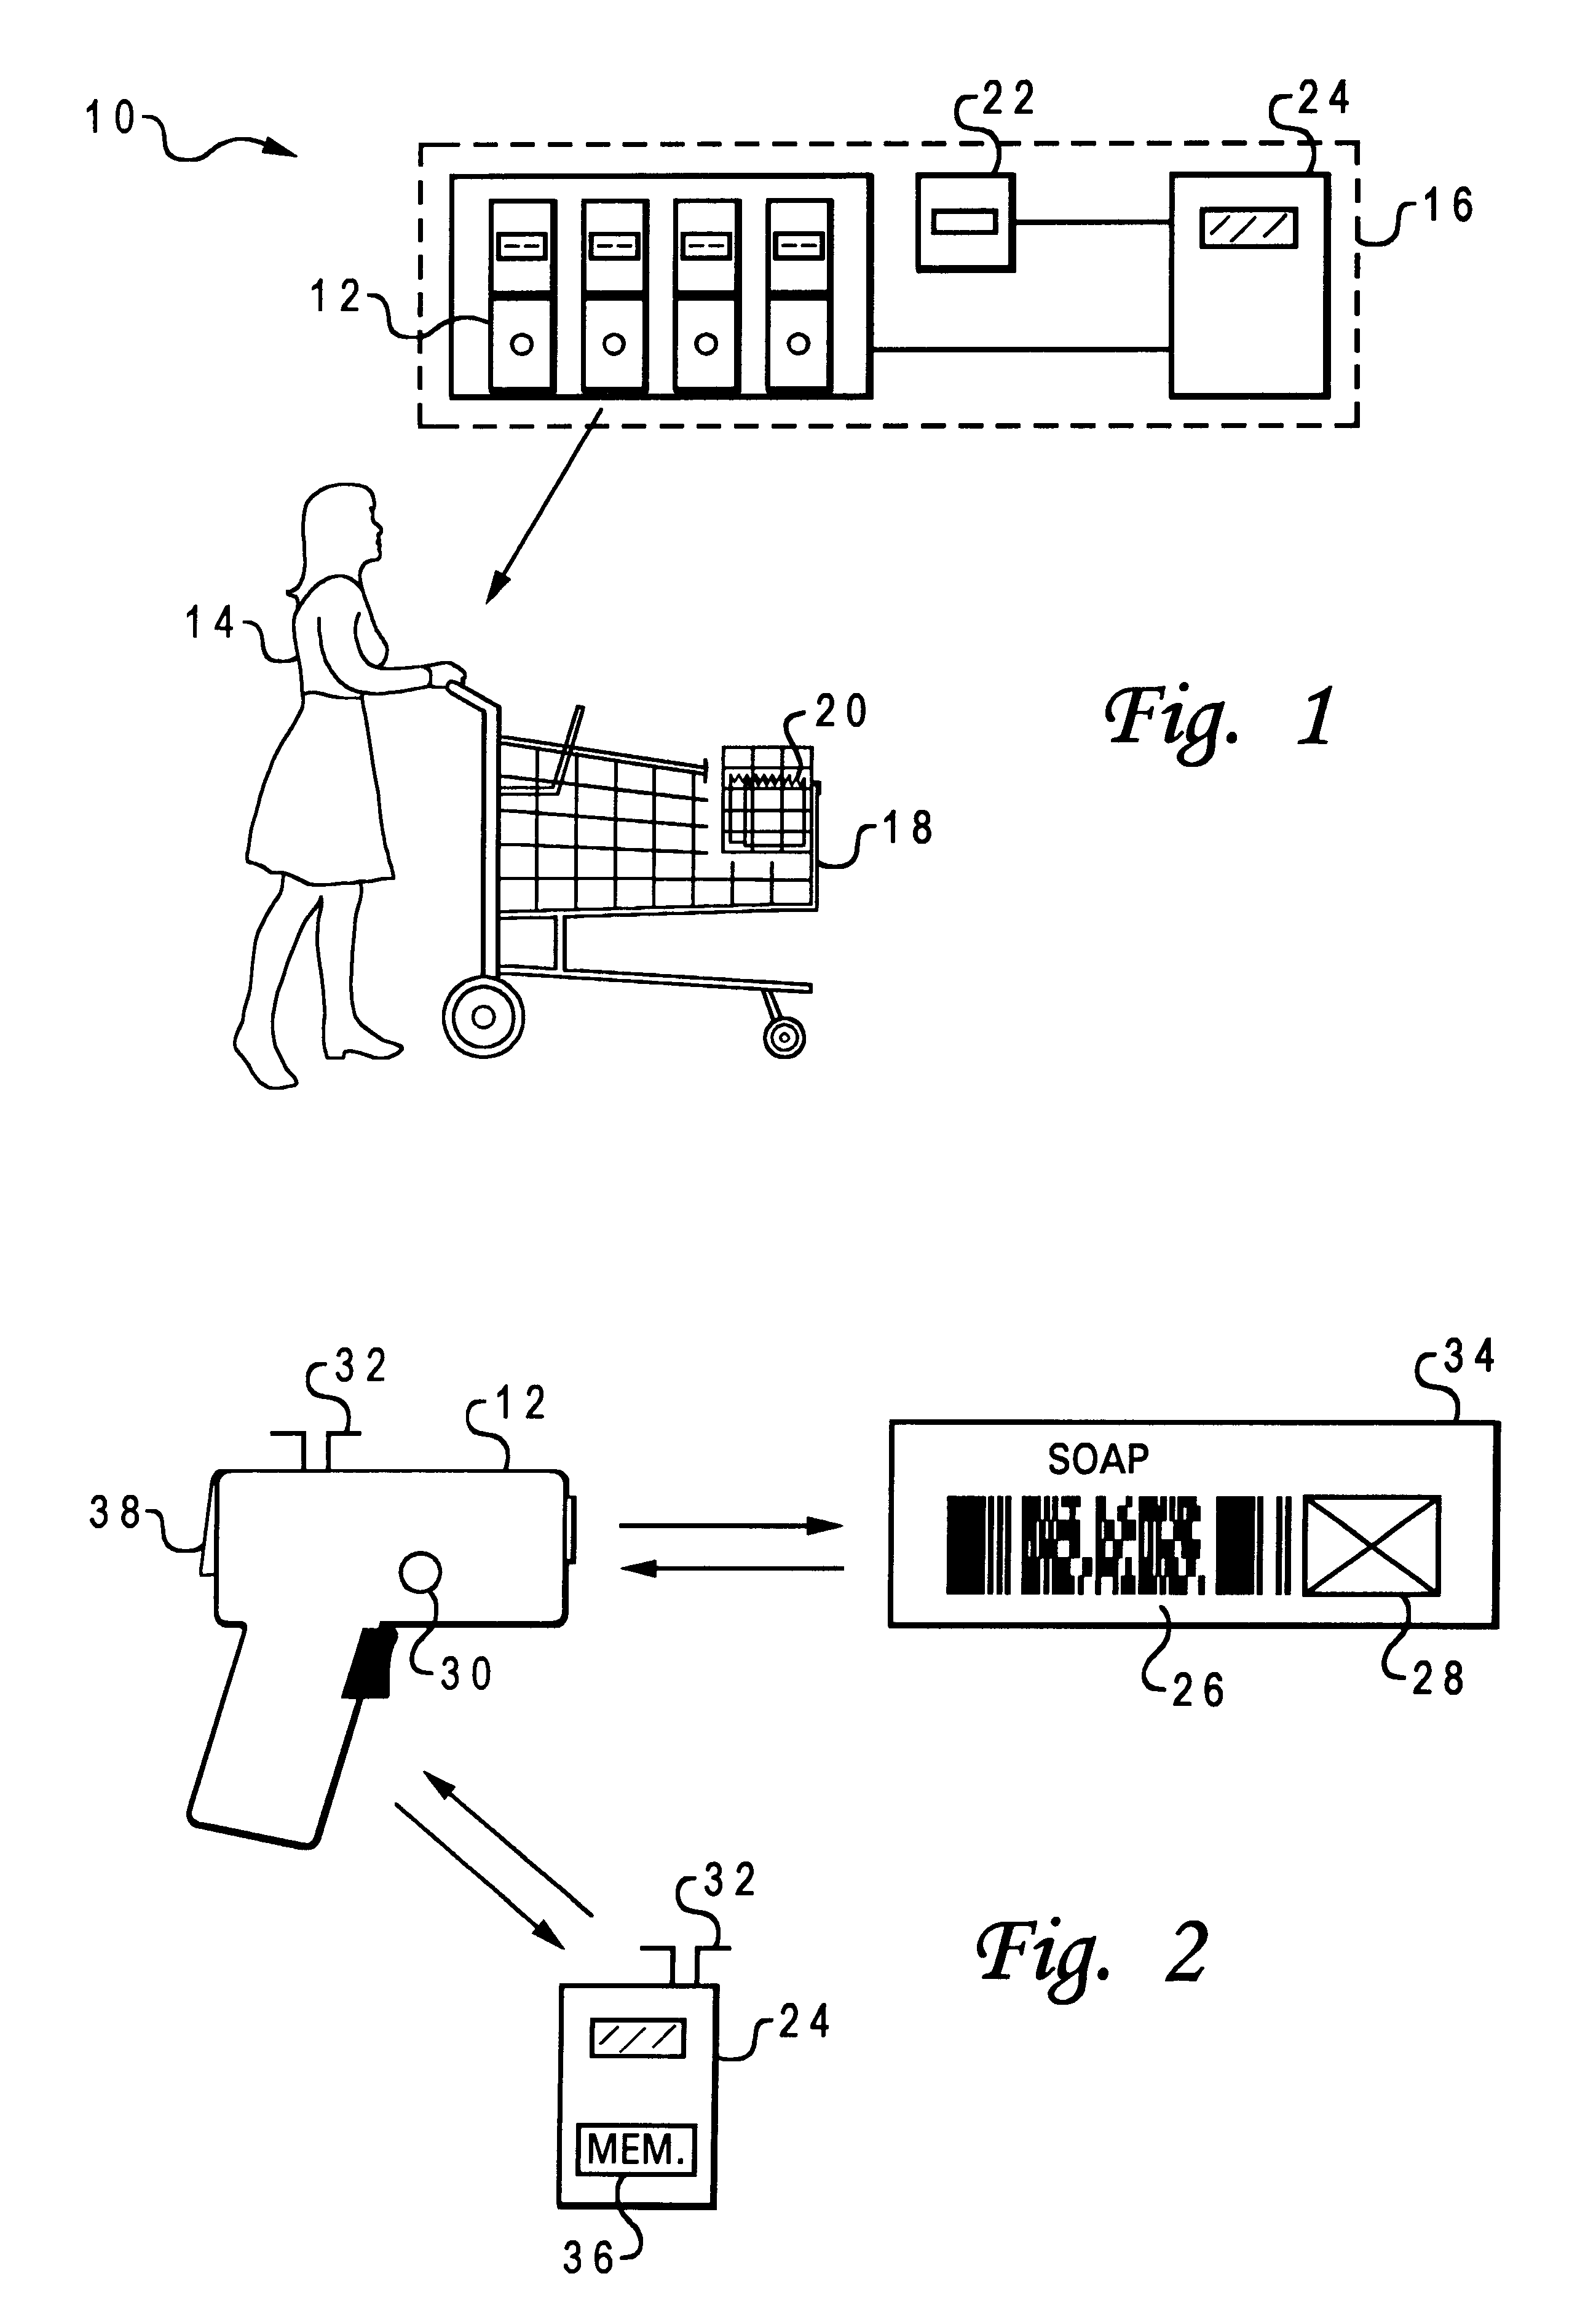 Method and system for a merchandise checkout system